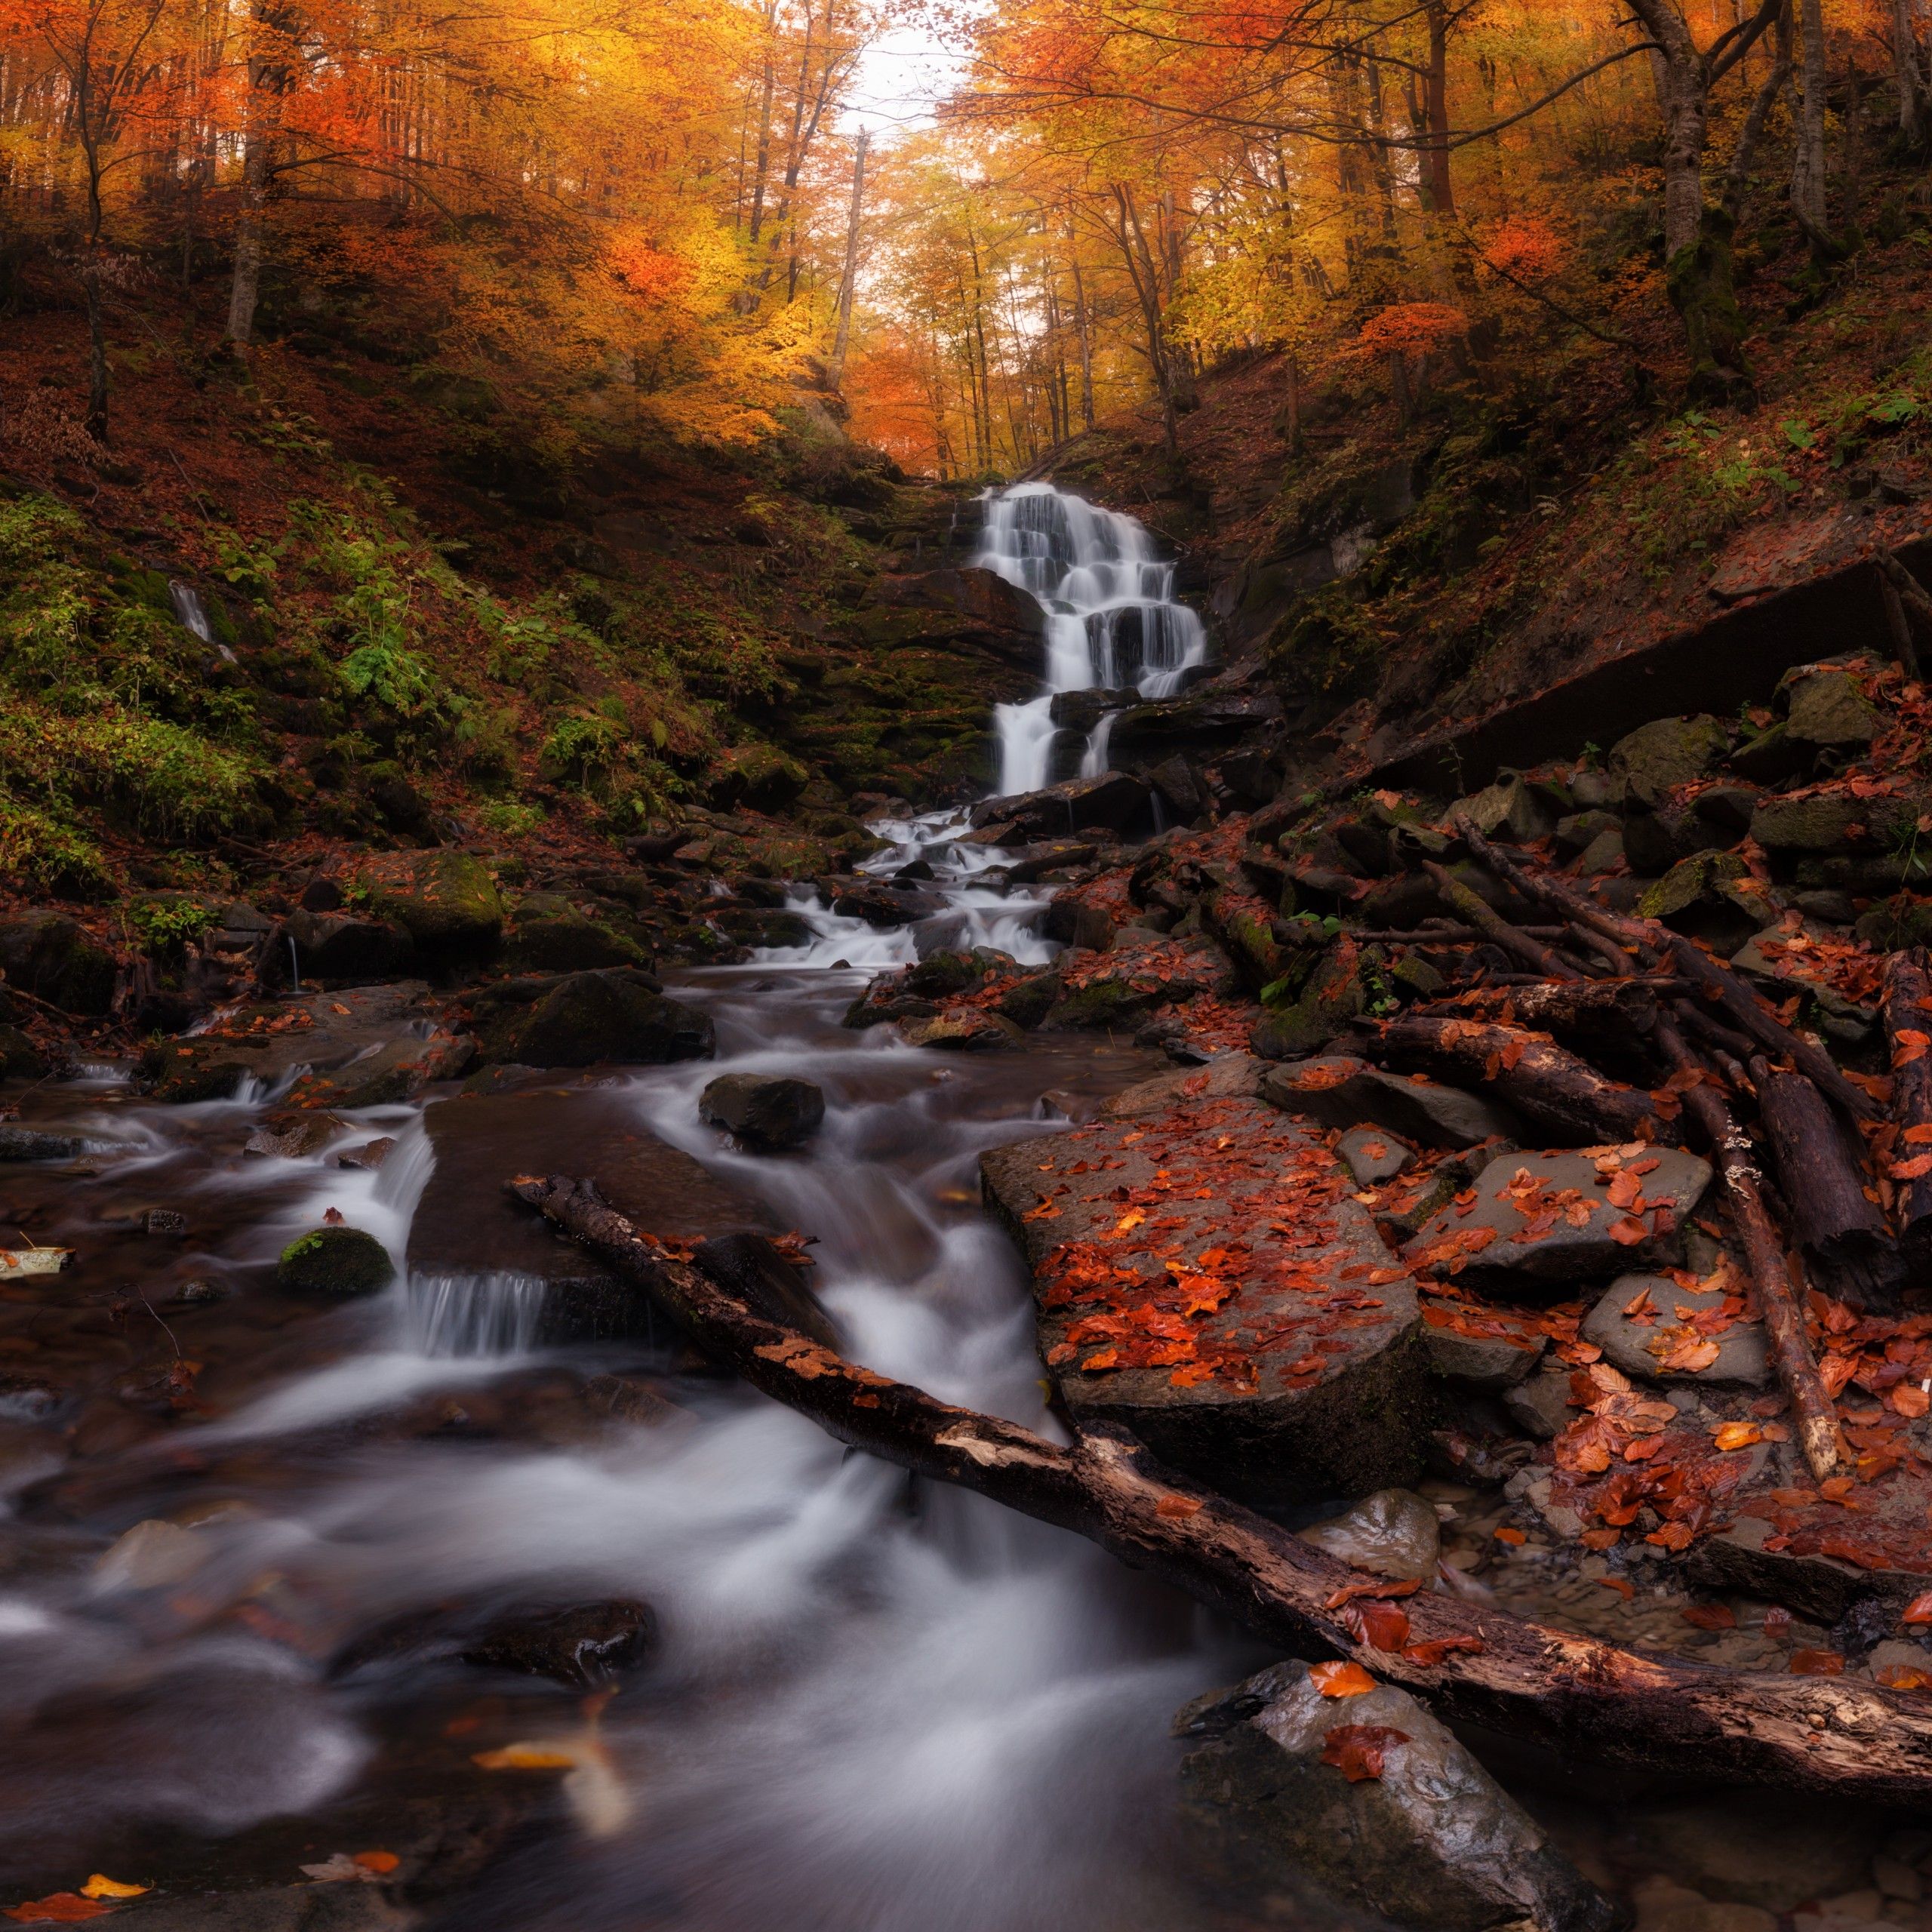 Wallpaper Autumn forest, Waterfall, Autumn leaves, 4K, 8K, Nature,. Wallpaper for iPhone, Android, Mobile and Desktop